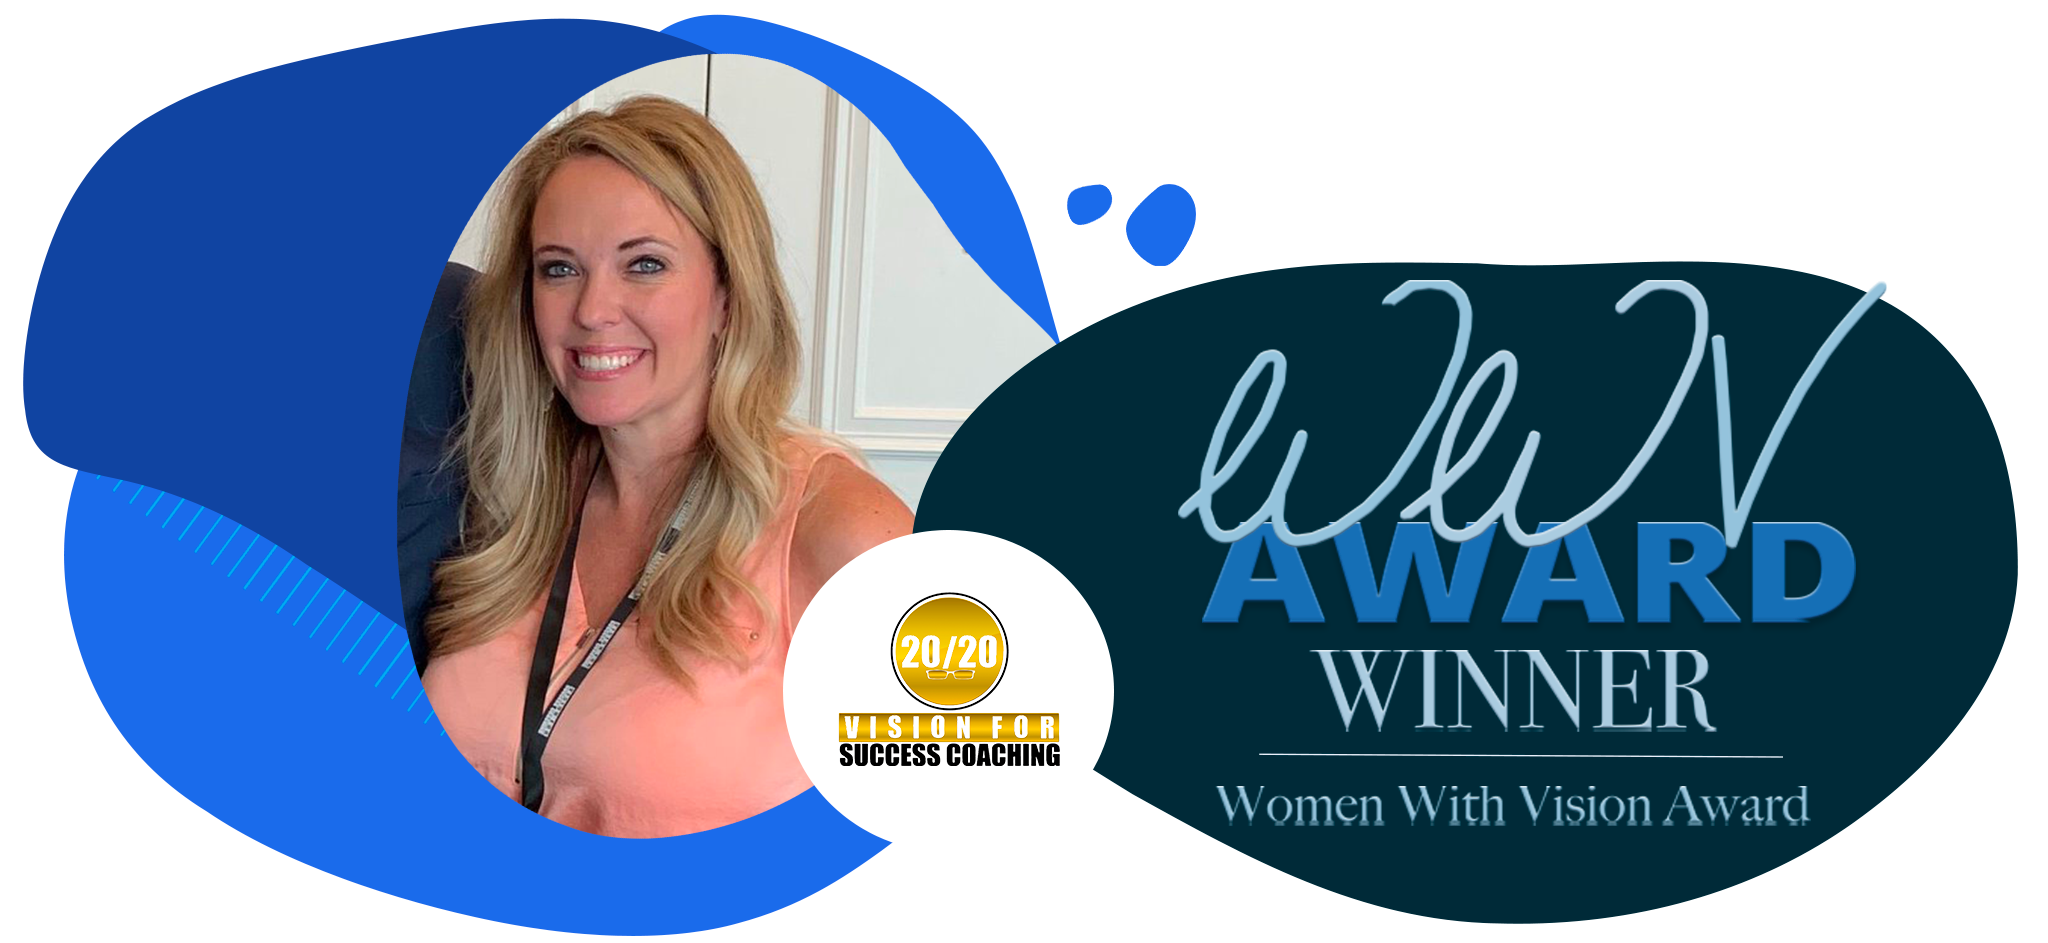 Michelle Dugan - winner of three consecutive Women With Vision Awards from 2020 Vision